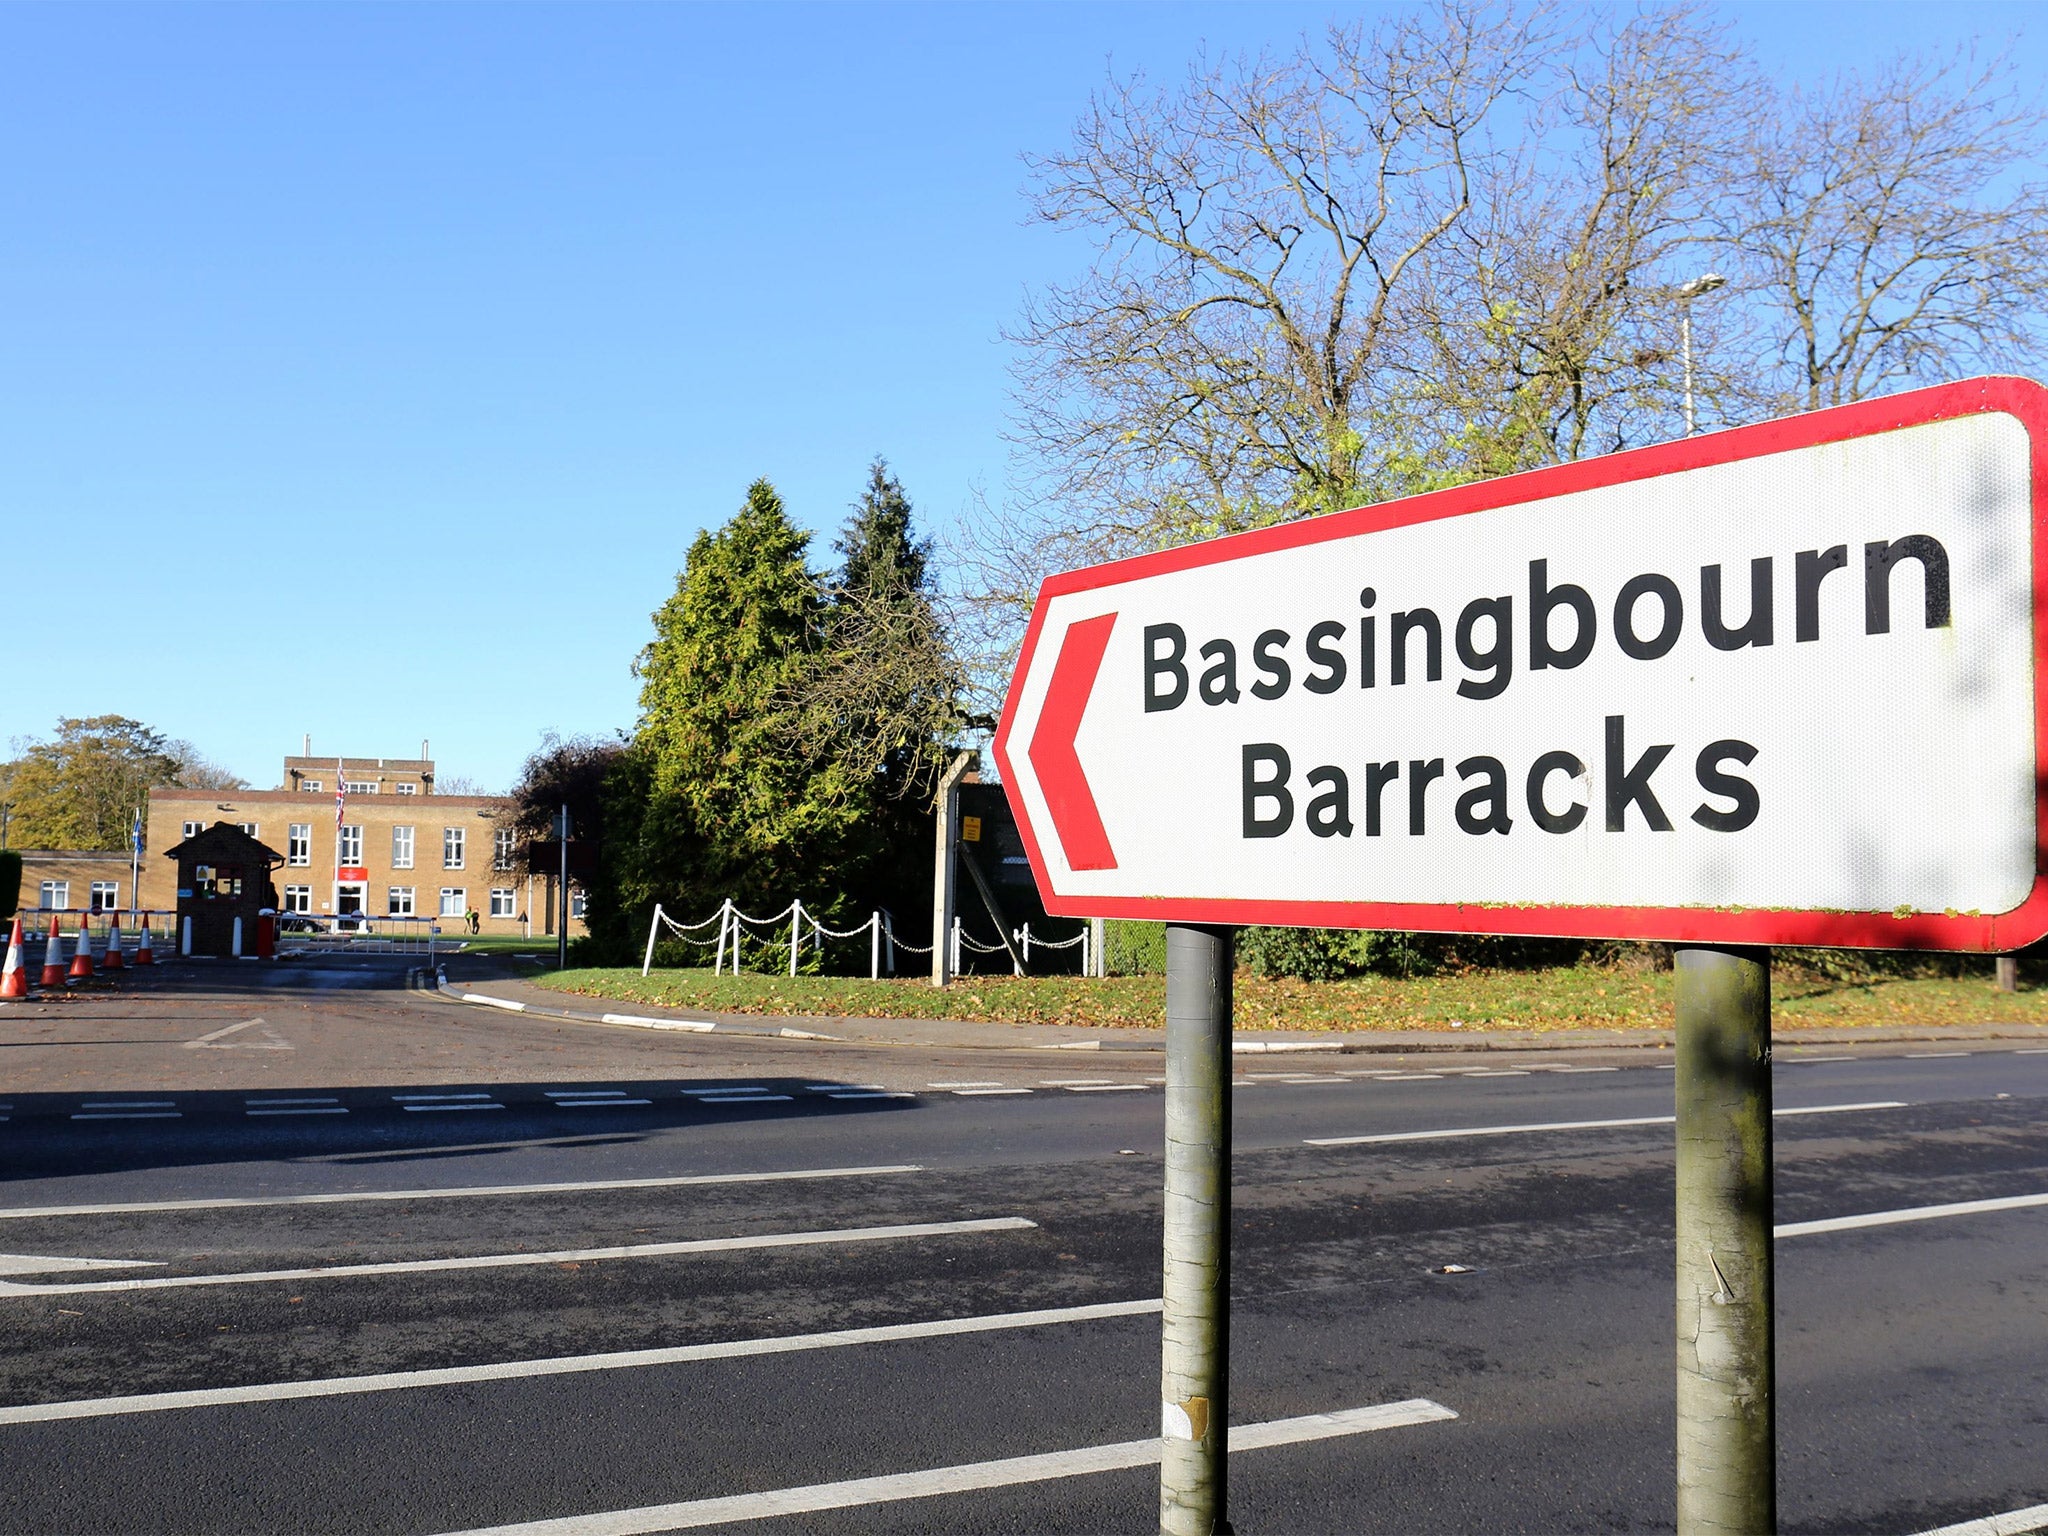 Bassingbourne Barracks in Cambridgeshire where the Libyan cadets were trained